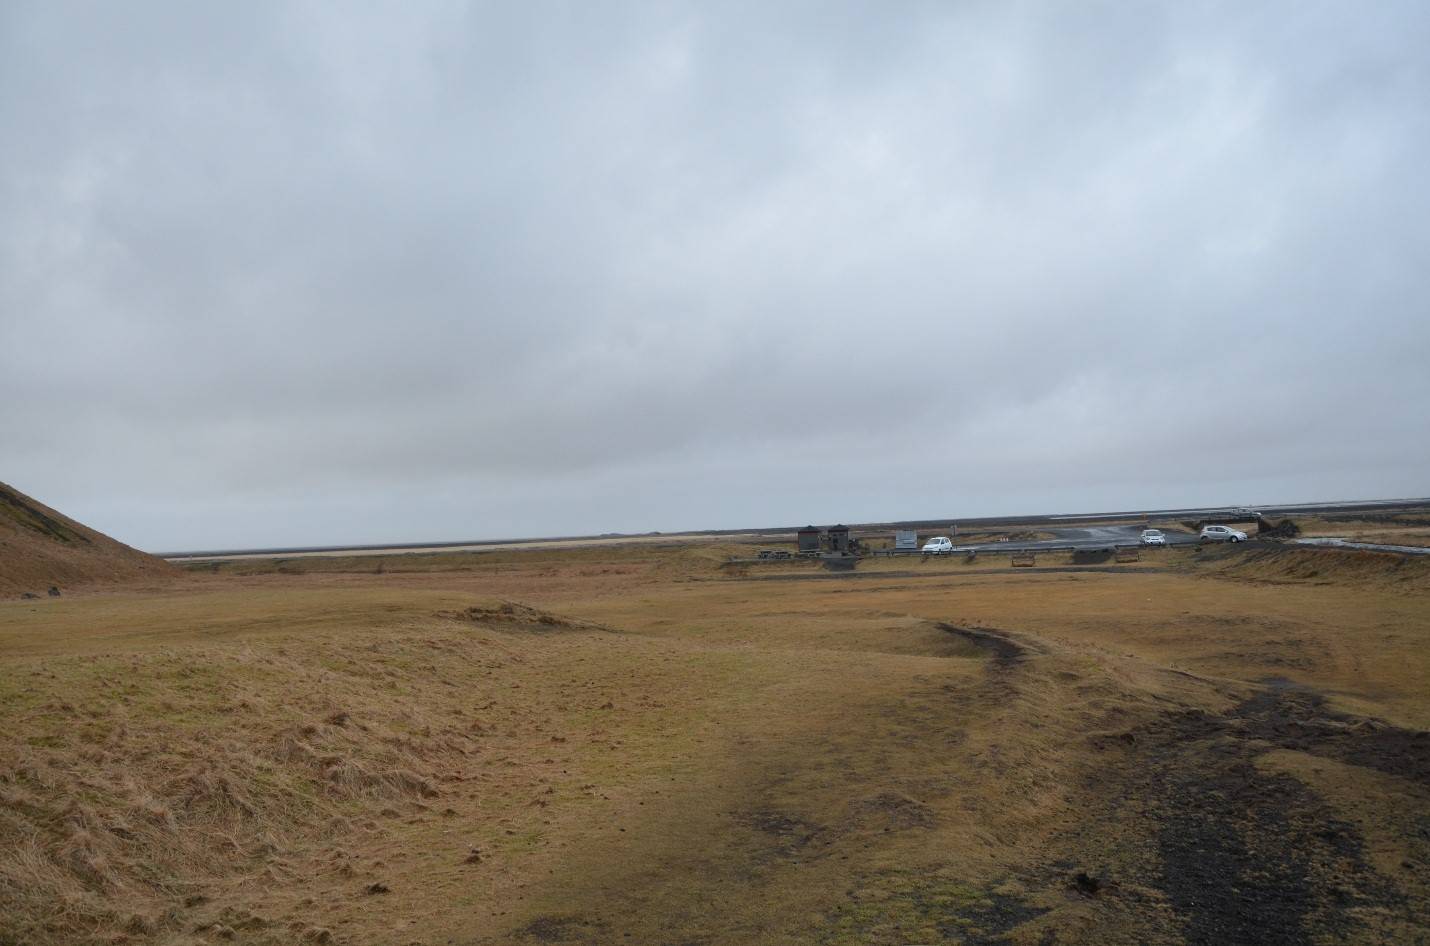 Iceland: The two remote huts that you see in this almost deserted landscape near the parking area are actually washrooms.